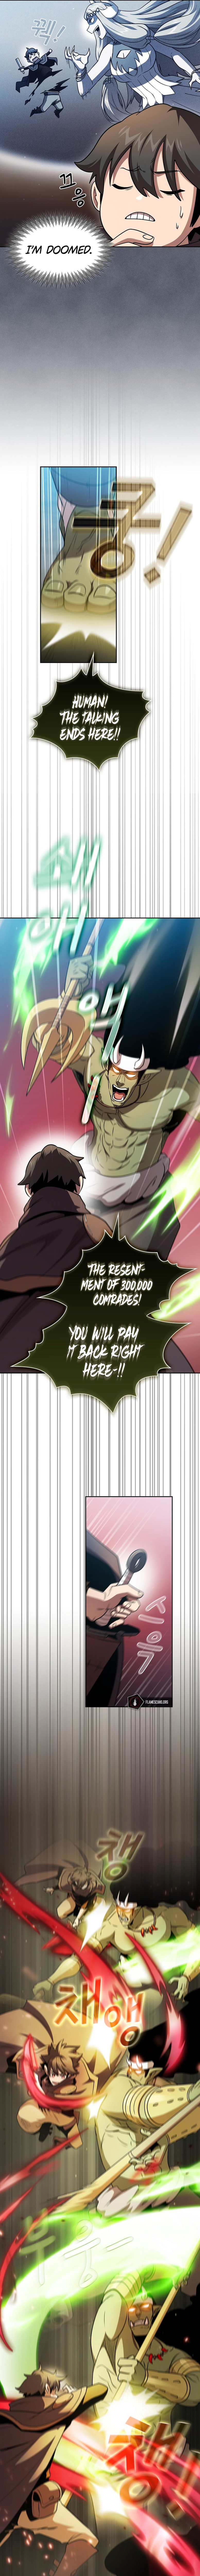 is-this-hero-for-real-chap-41-2